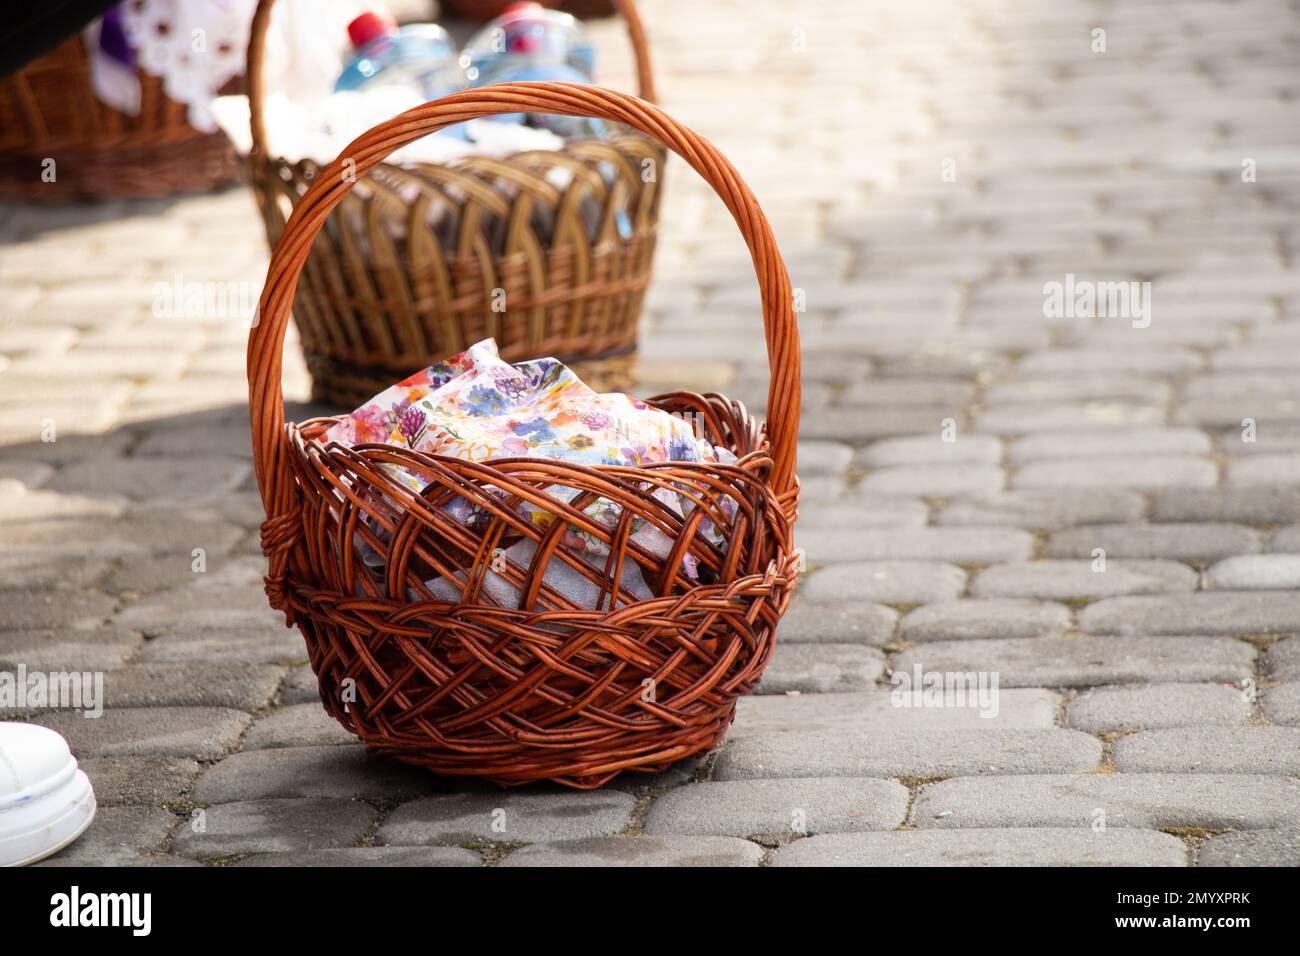 Ukraine Dnipro, Dnipropetrovsk 02.05.2021 - The priest consecrated Easter baskets with food. Christians at the temple. Traditions of celebrating Easte Stock Photo